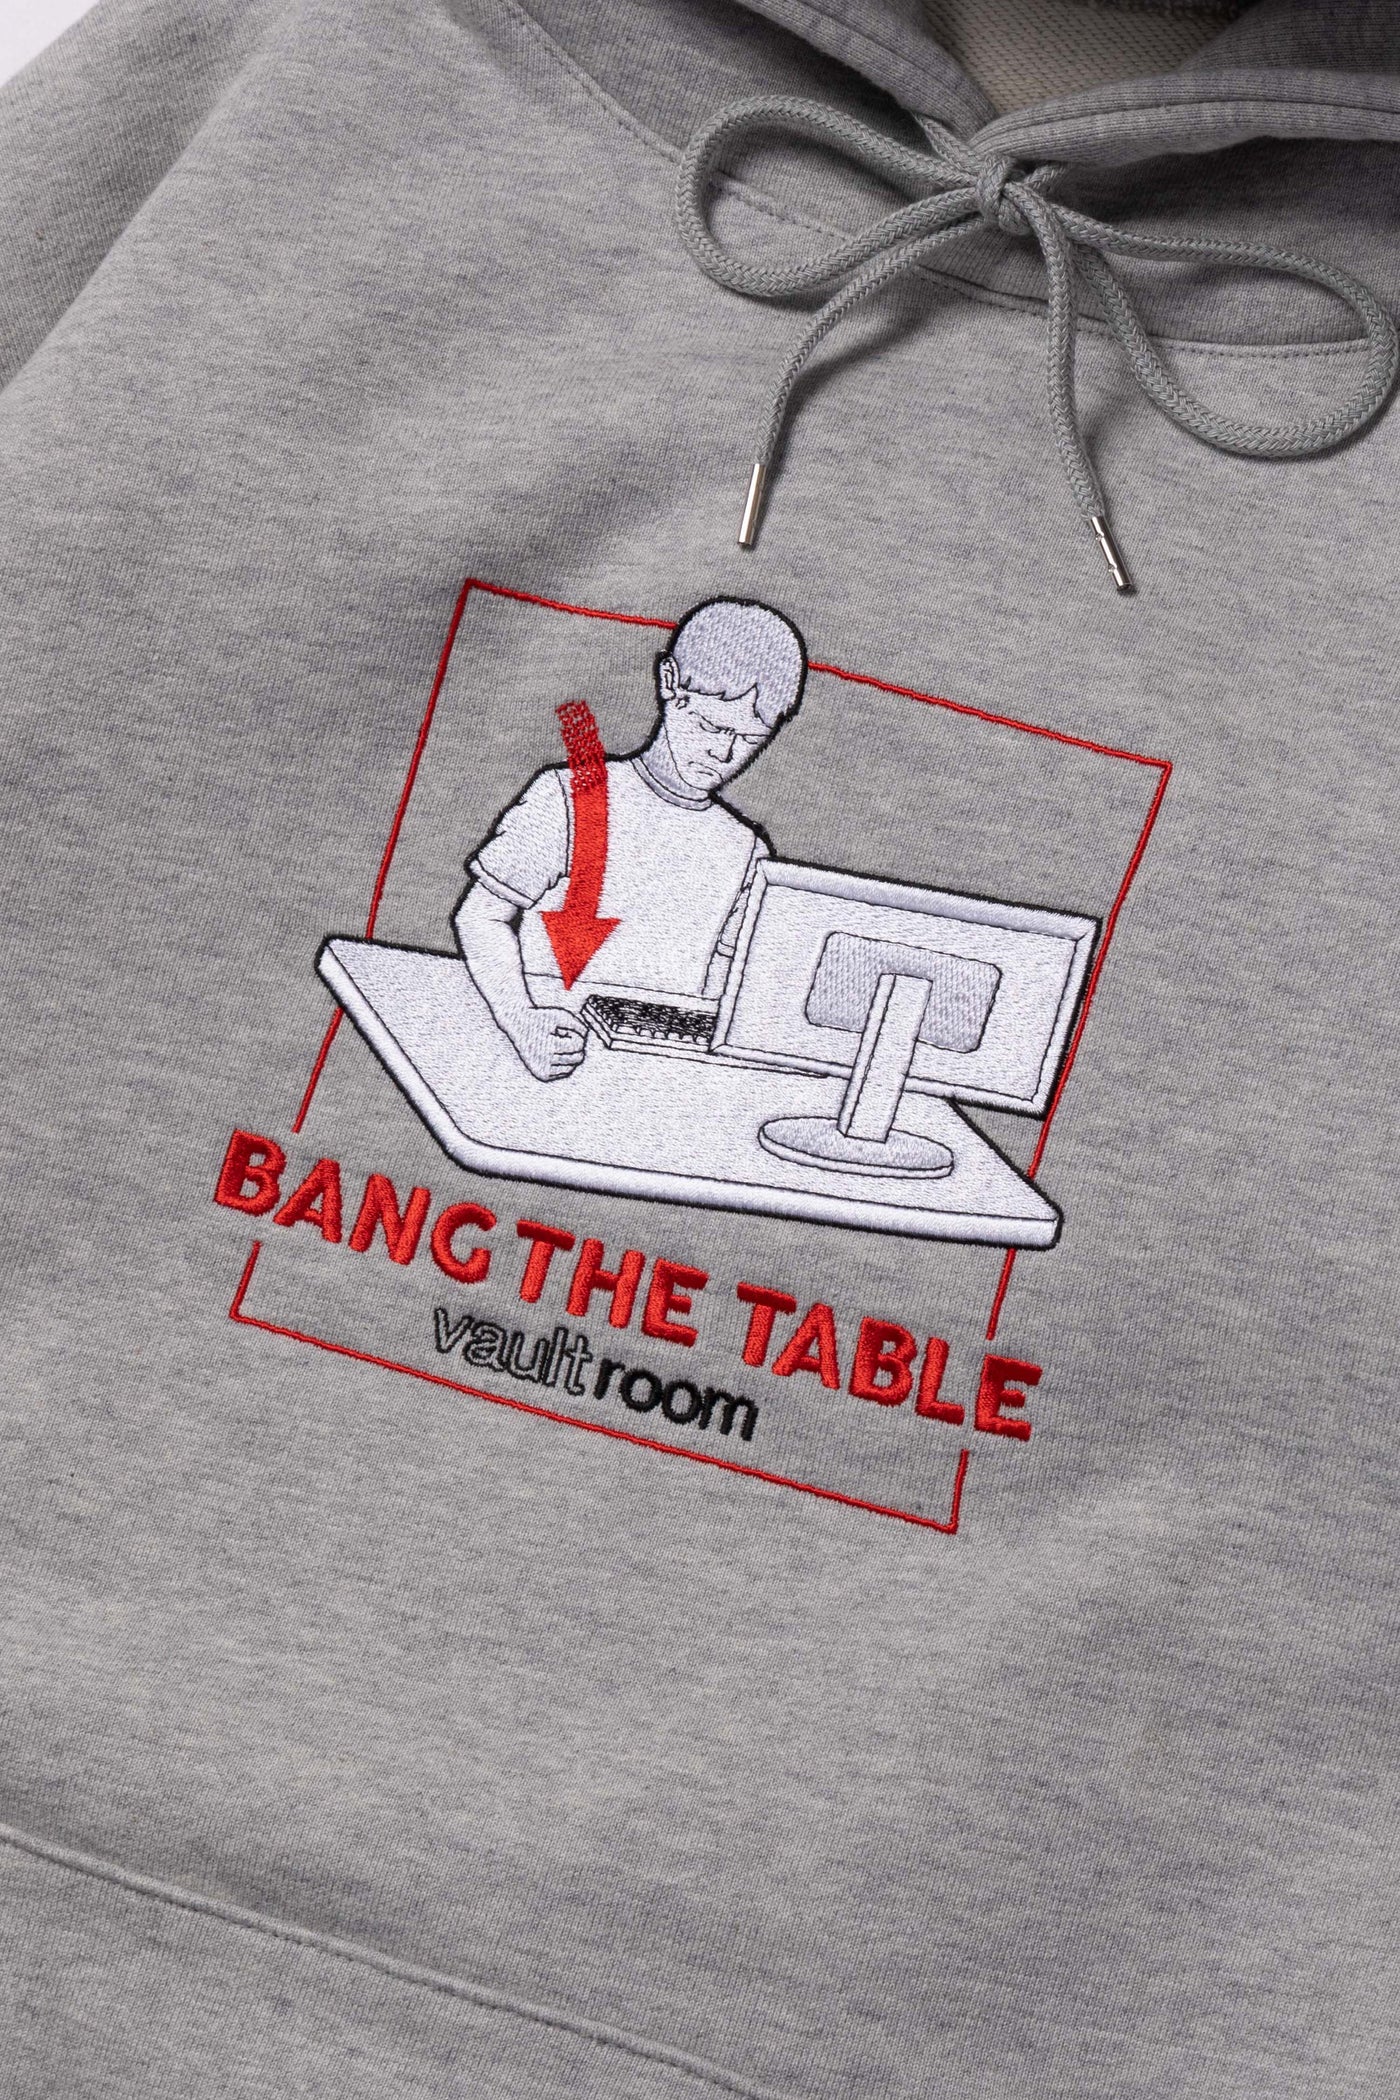 BANG THE TABLE HOODIE / GRY